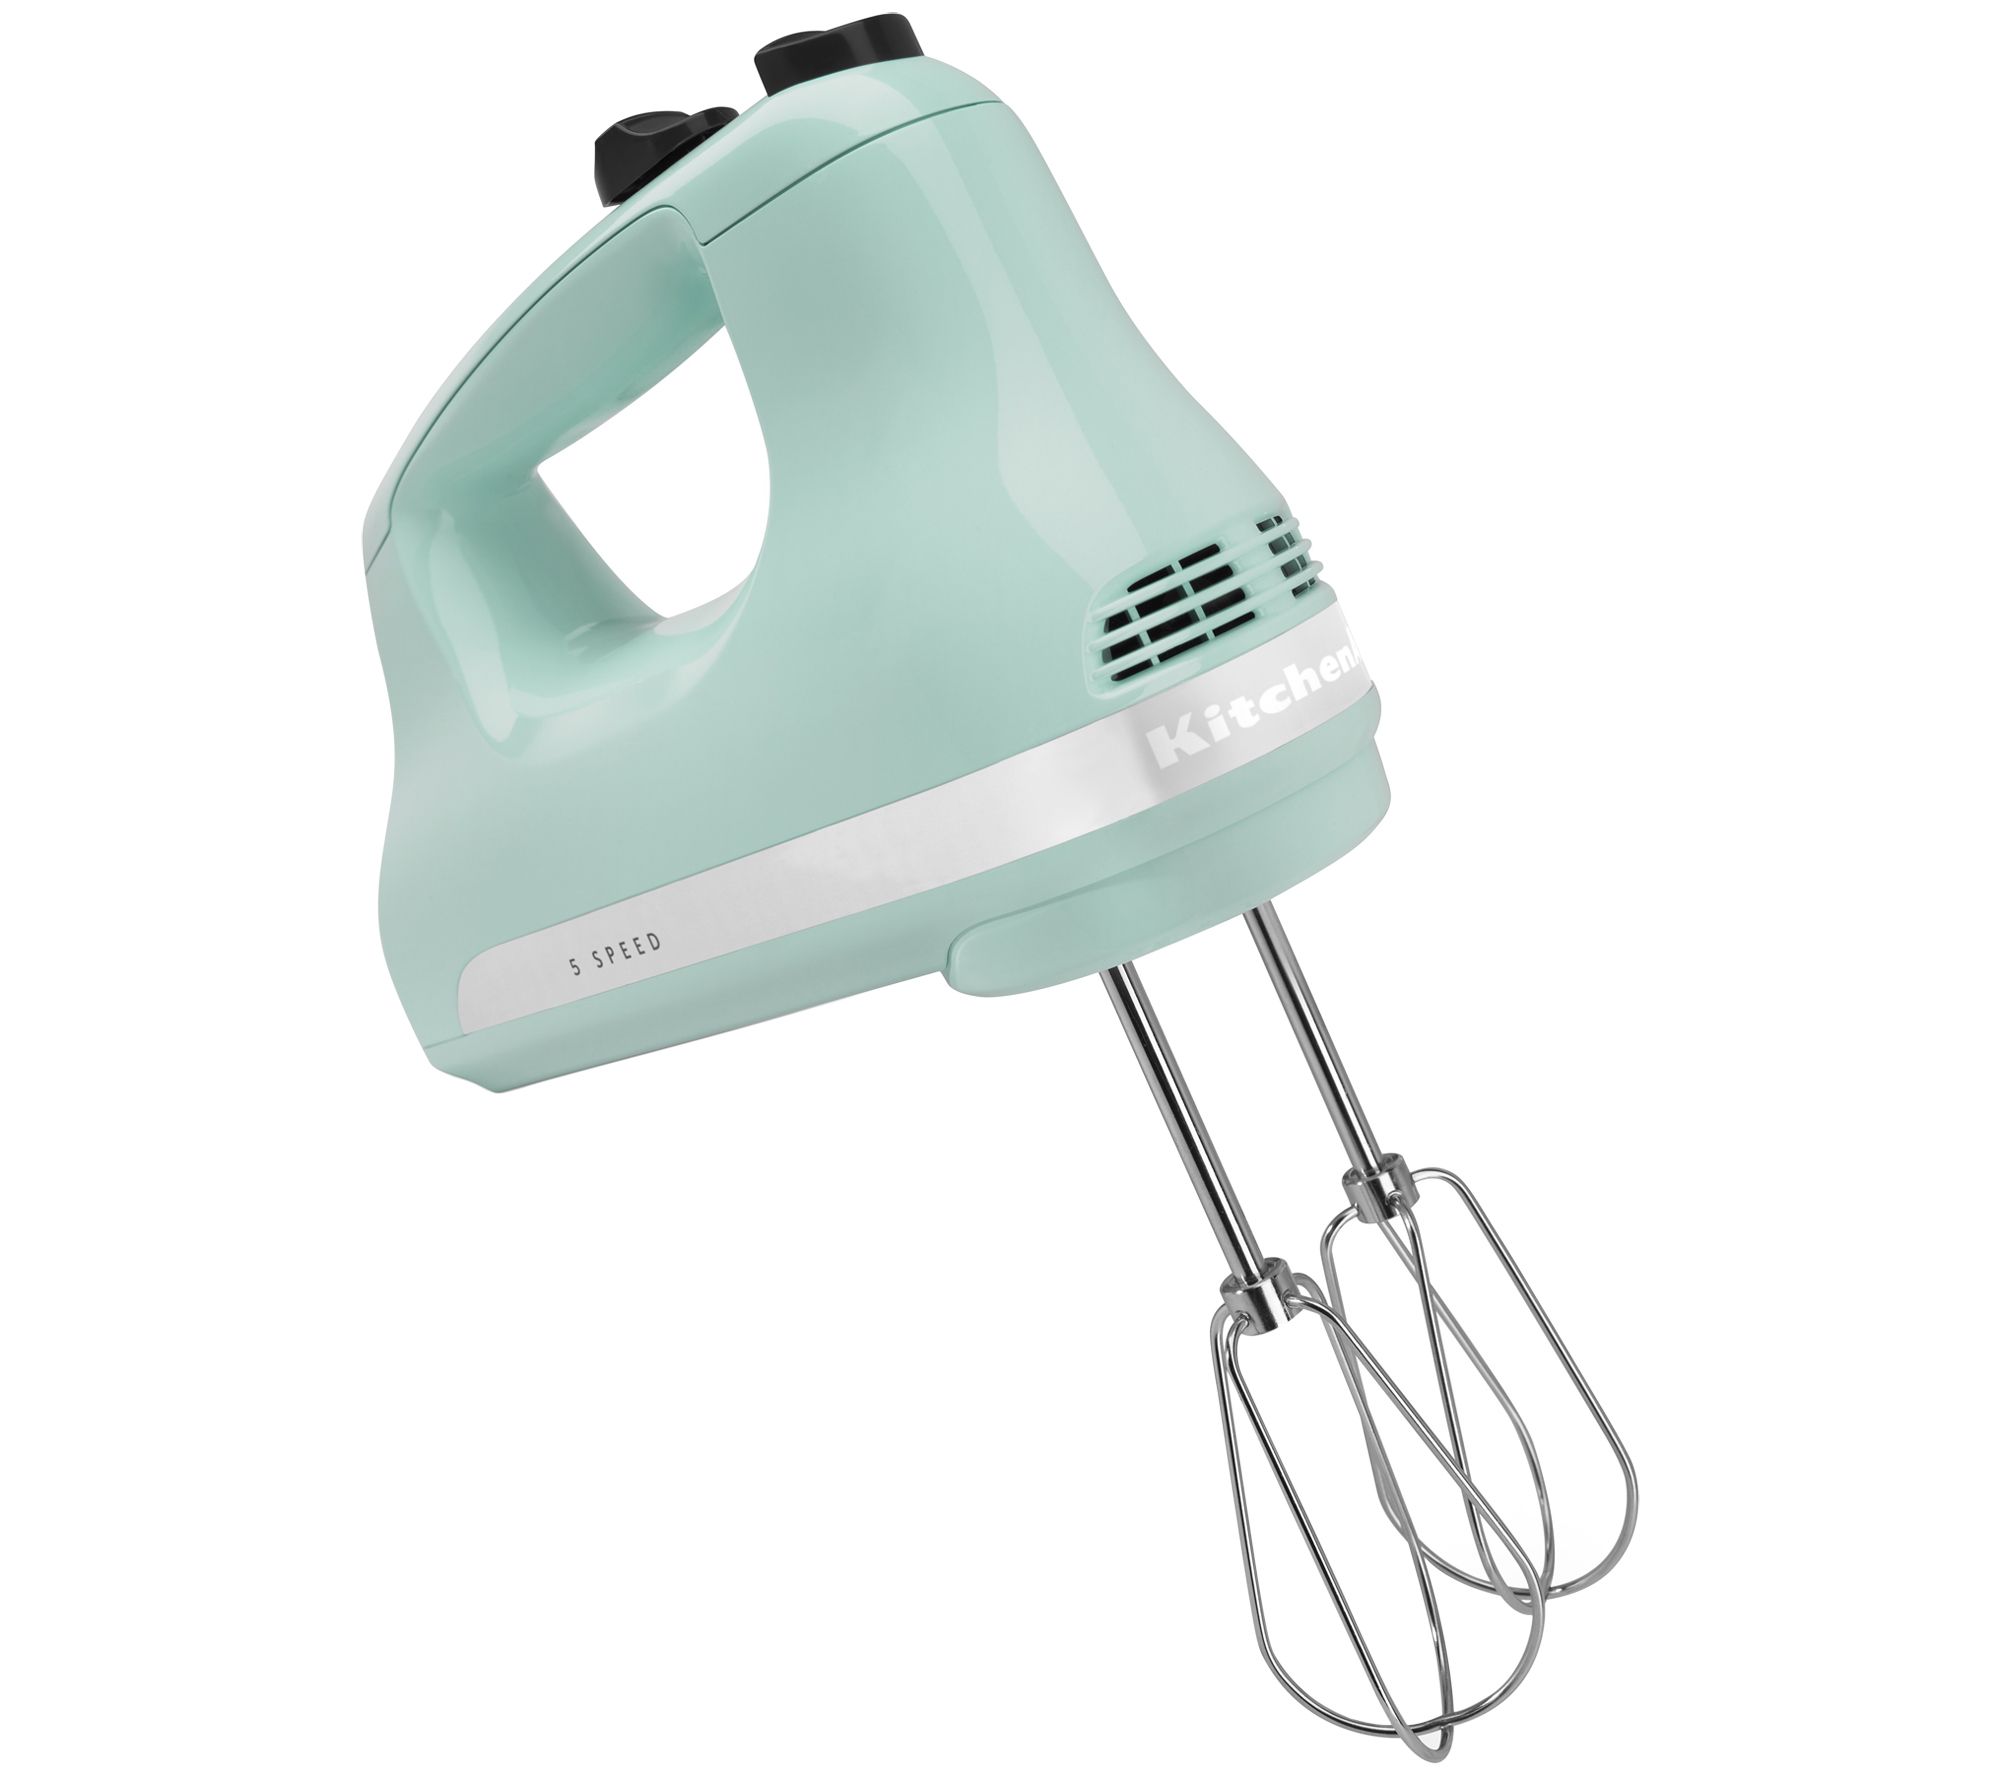 KitchenAid Silver 9-Speed Electric Hand Mixer + Reviews